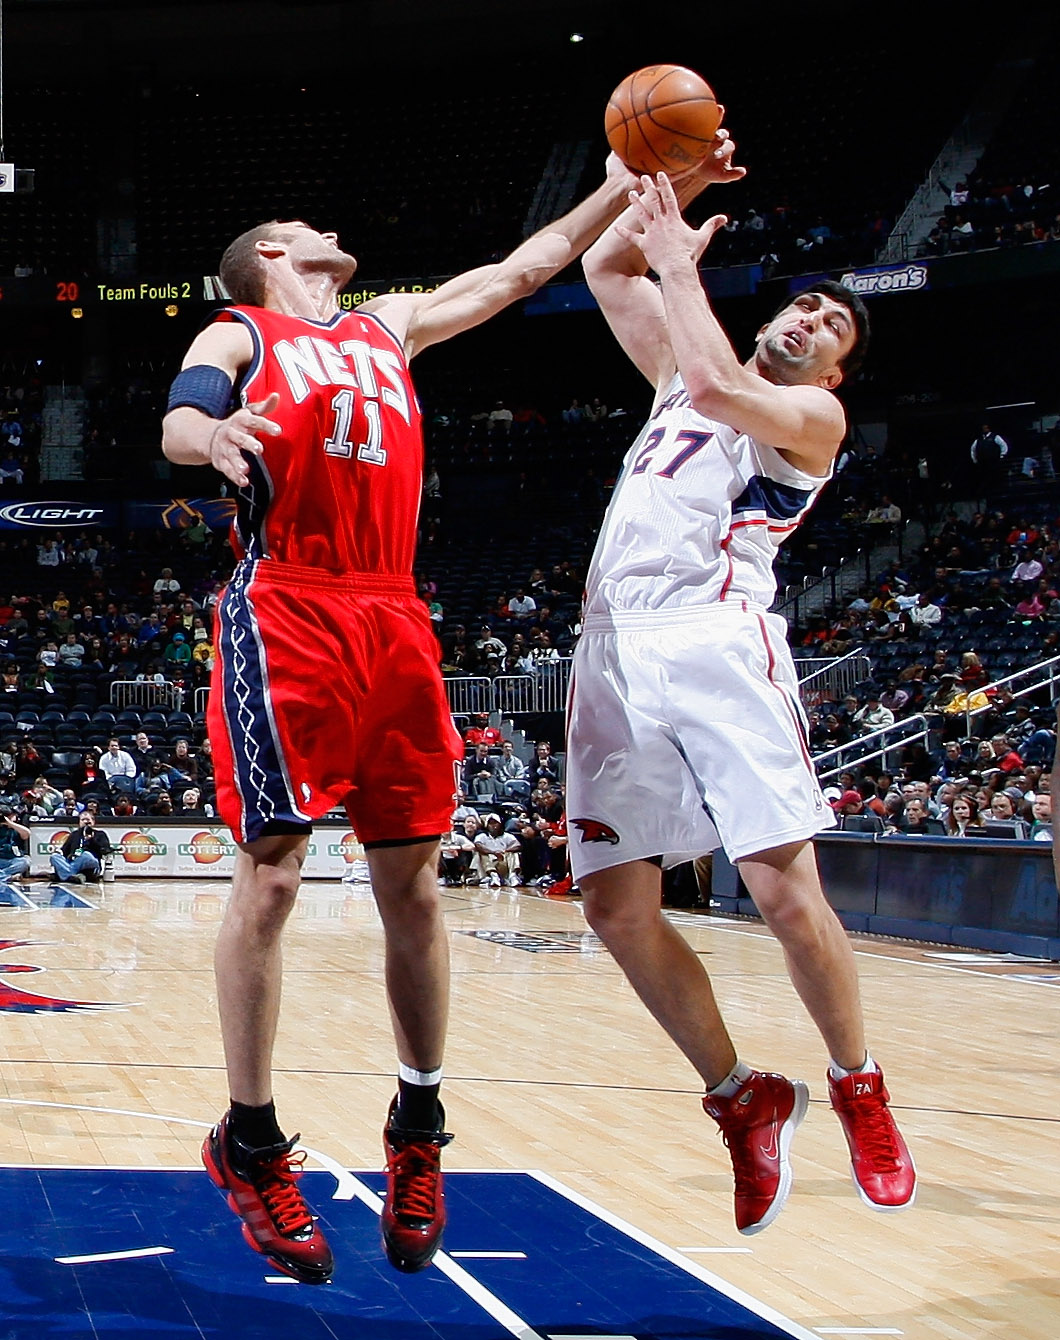 ATLANTA, GA - DECEMBER 07:  Zaza Pachulia #27 of the Atlanta Hawks battles for a rebound against Brook Lopez #11 of the New Jersey Nets at Philips Arena on December 7, 2010 in Atlanta, Georgia.  NOTE TO USER: User expressly acknowledges and agrees that, b